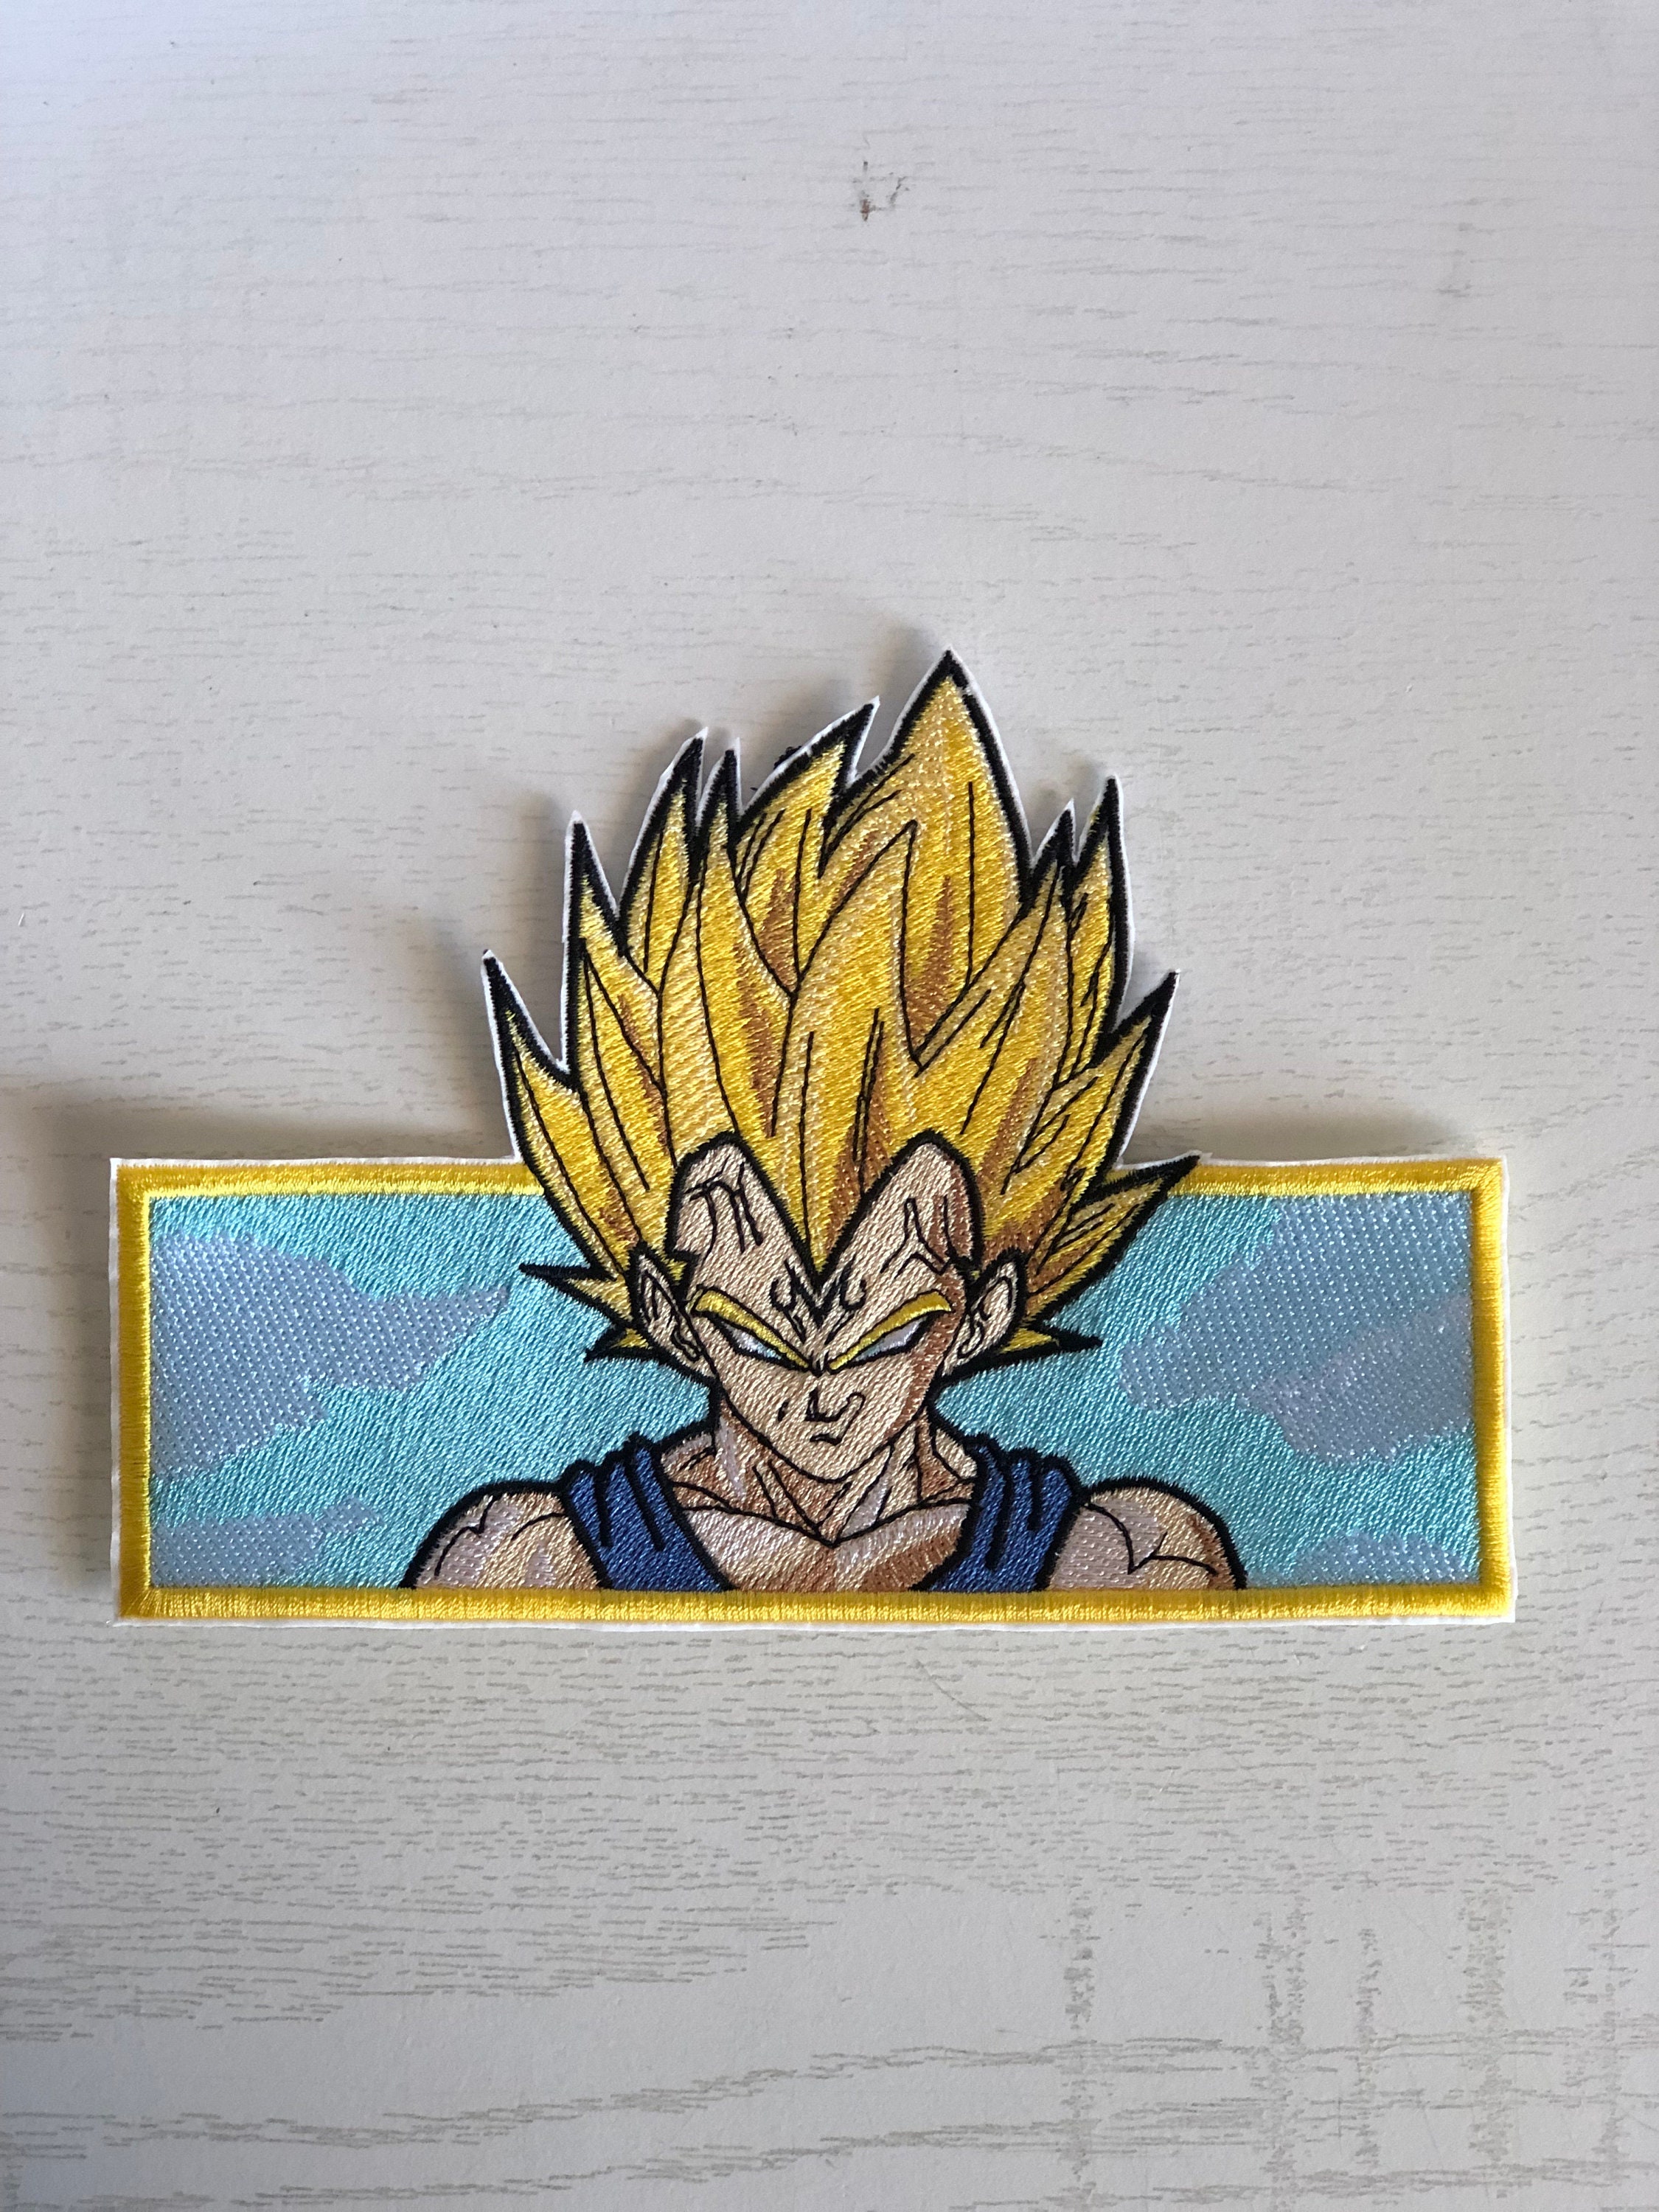 Cheap Patches For Clothes Bag Iron On Thermal Stickers Goku De